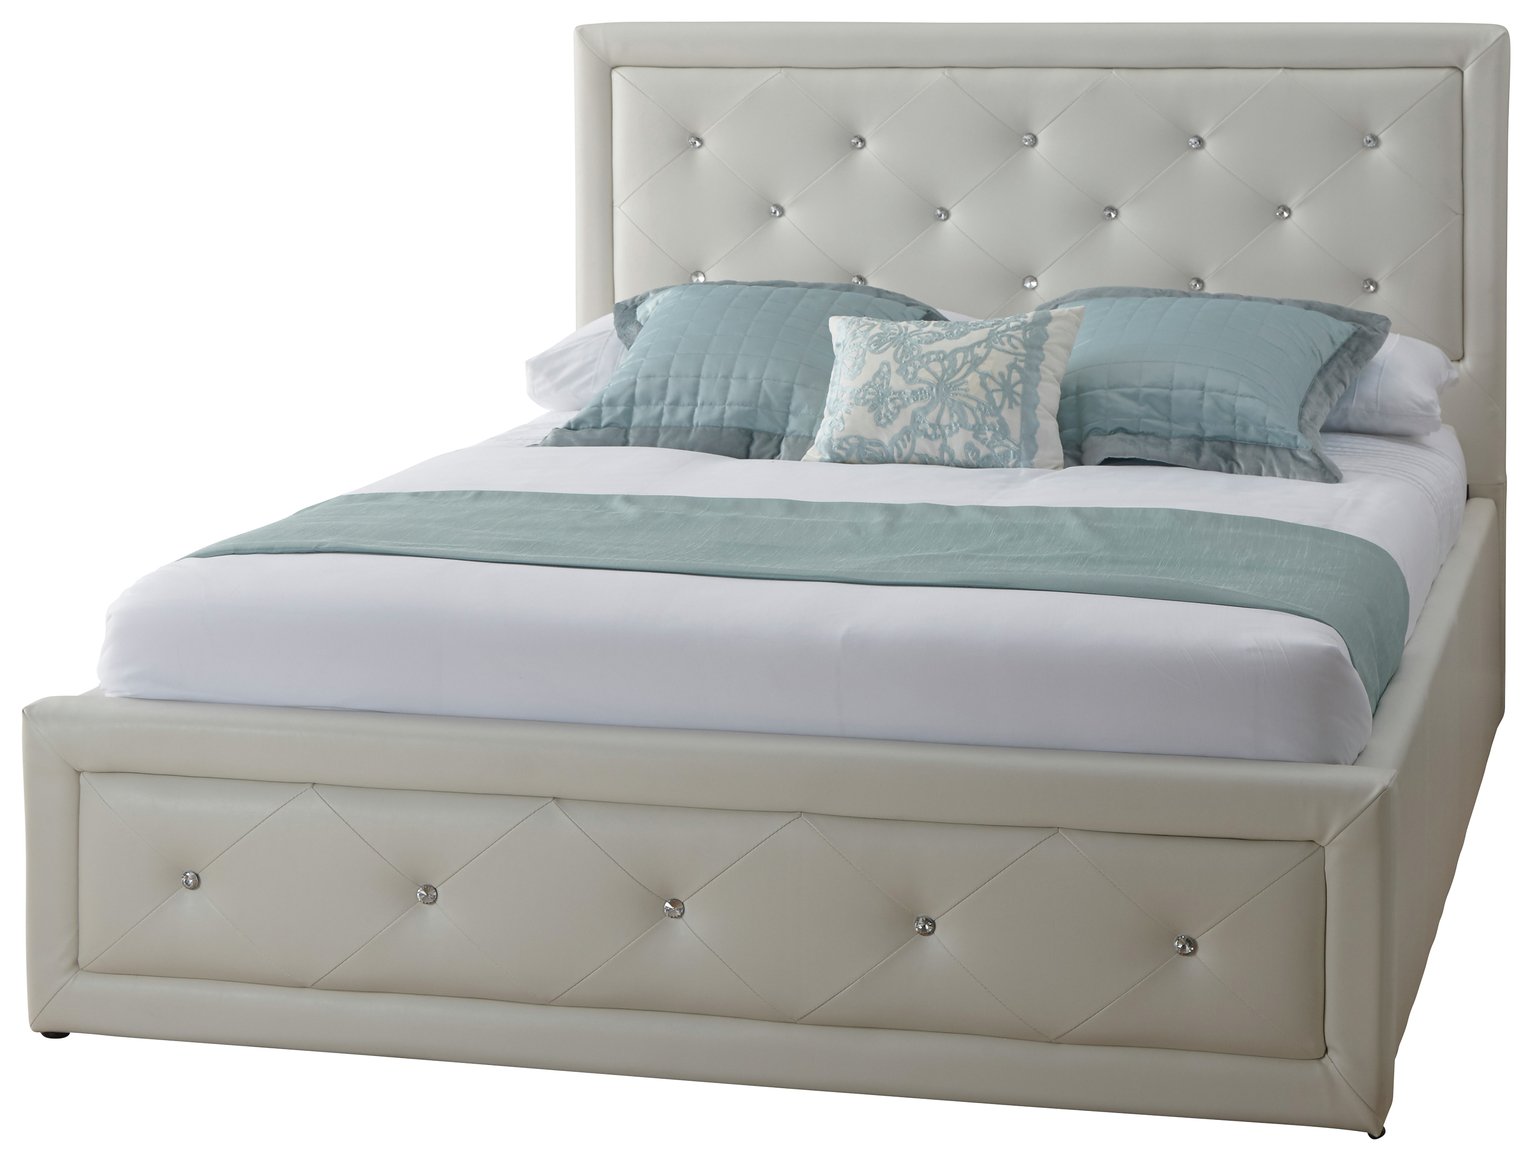 GFW Hollywood Ottoman Double Bed Frame - White